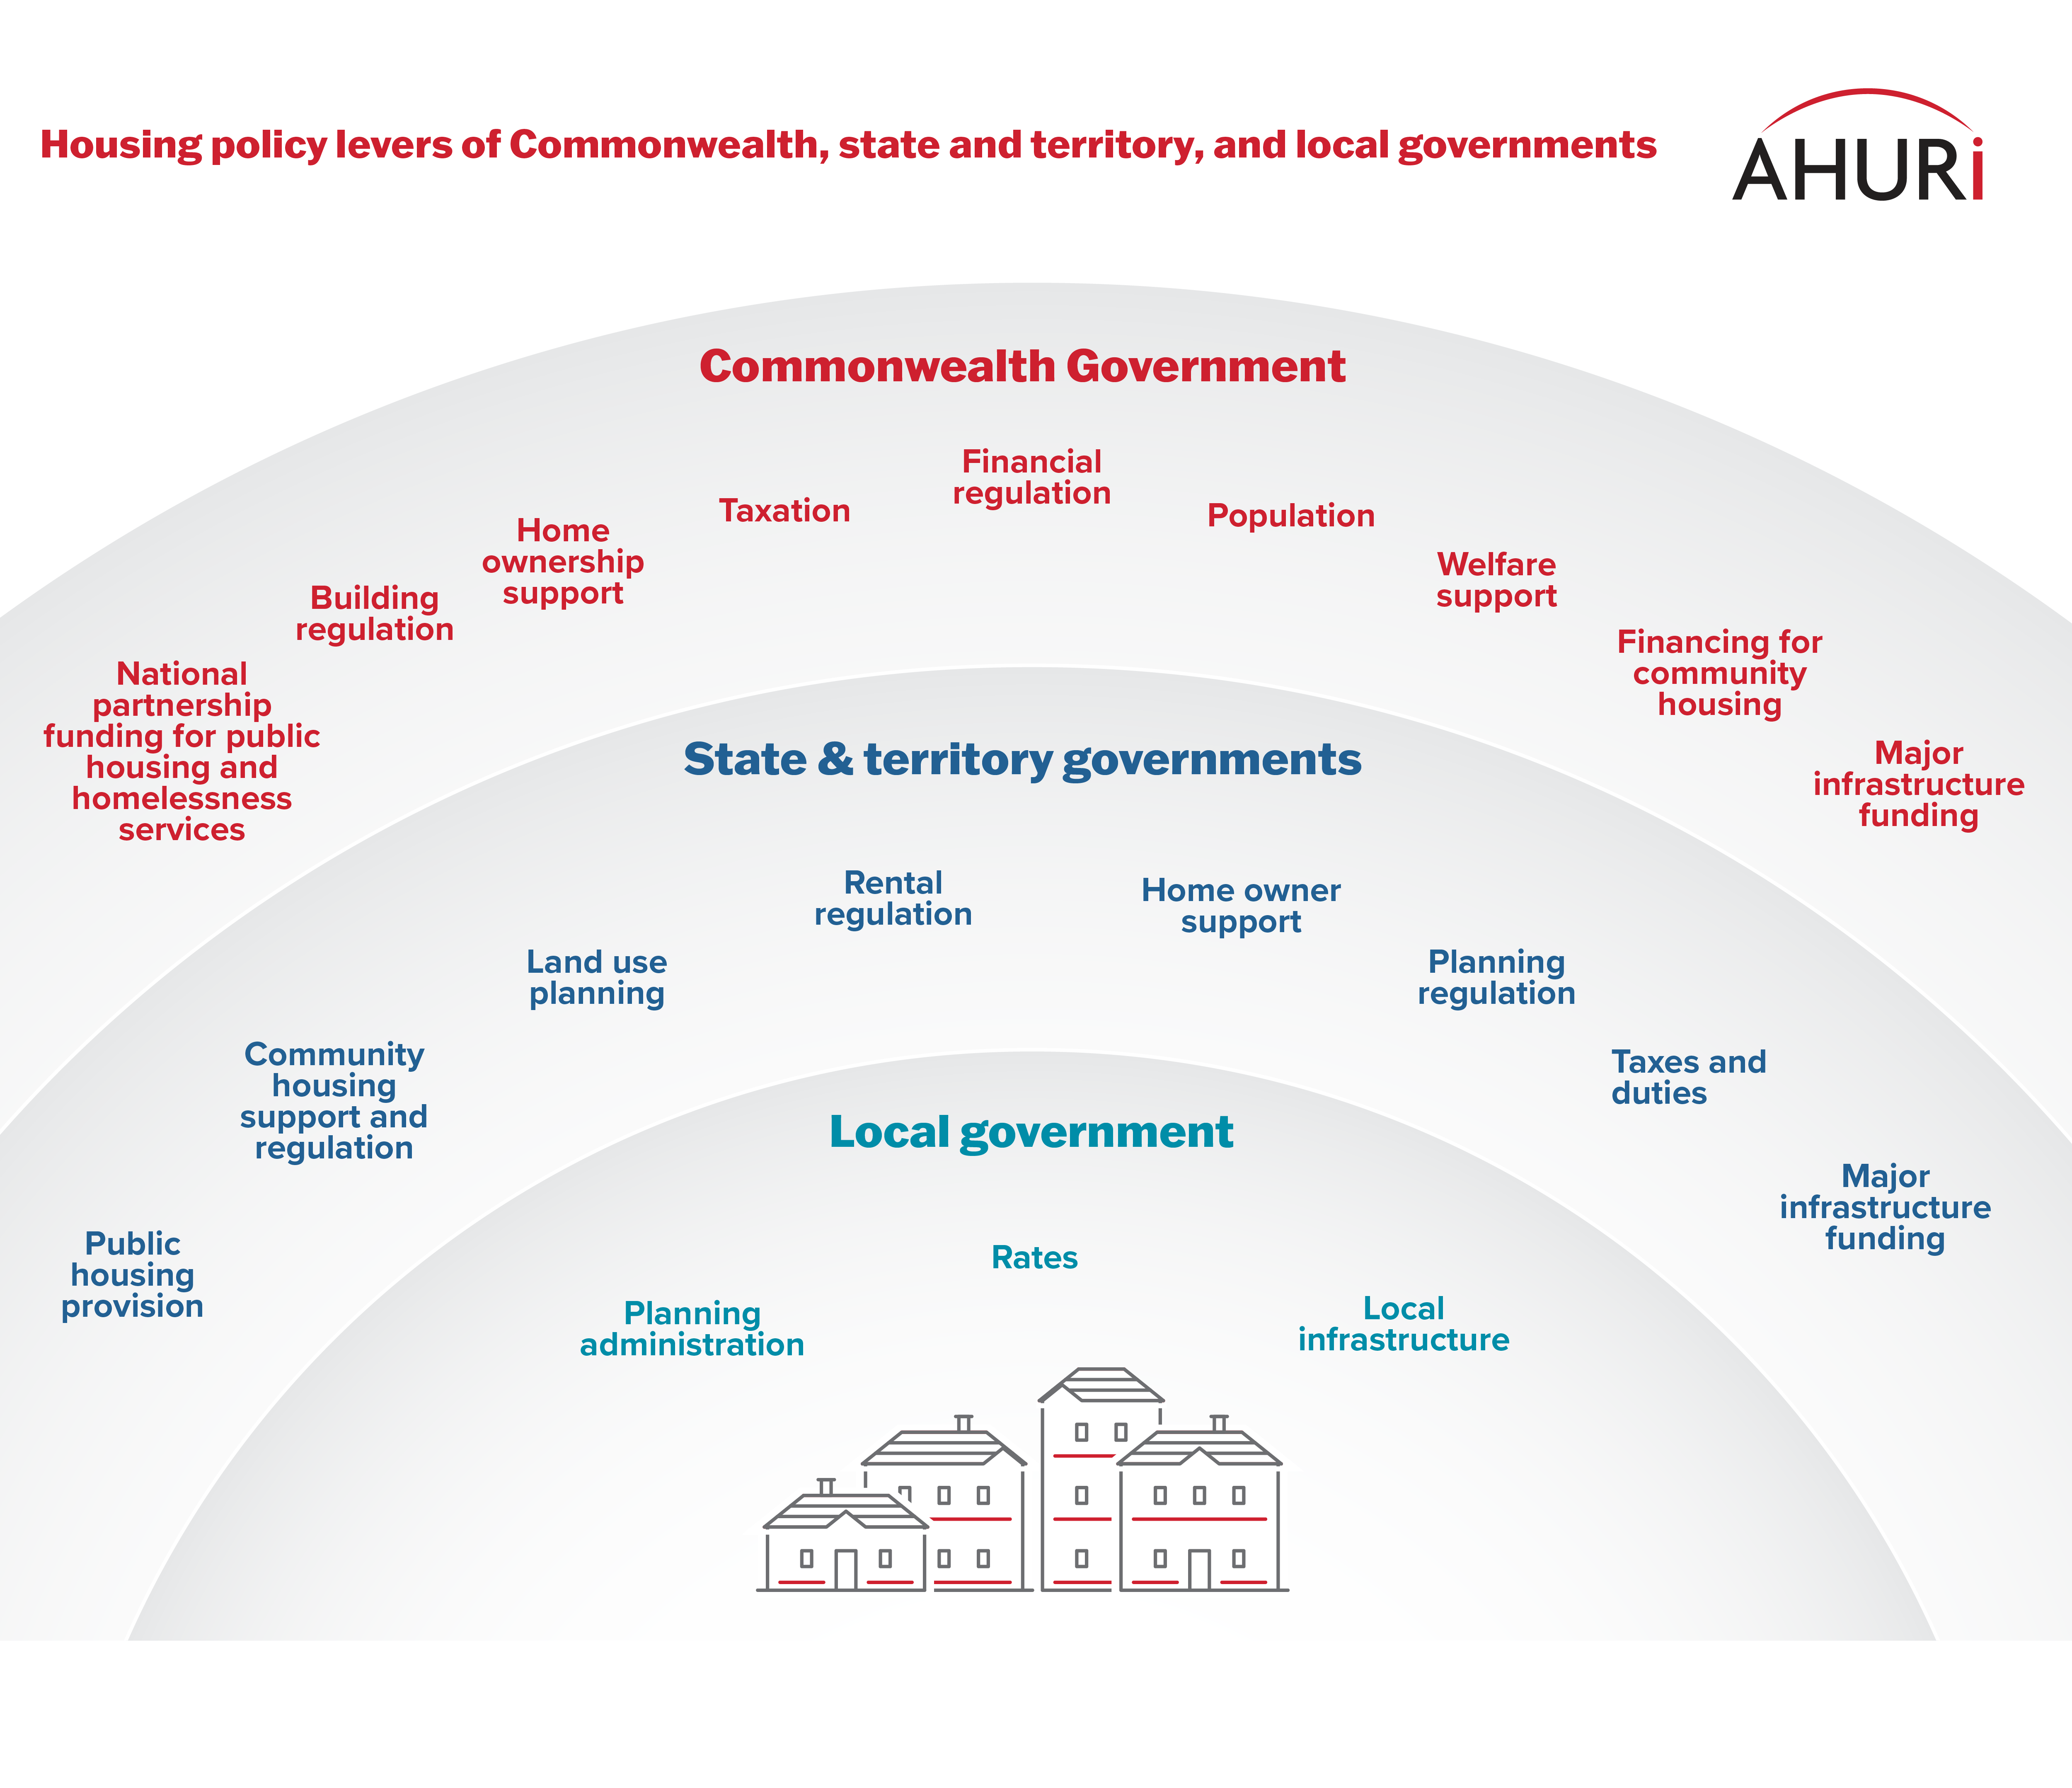 Housing policy levers of Commonwealth, state and territory, and local governments